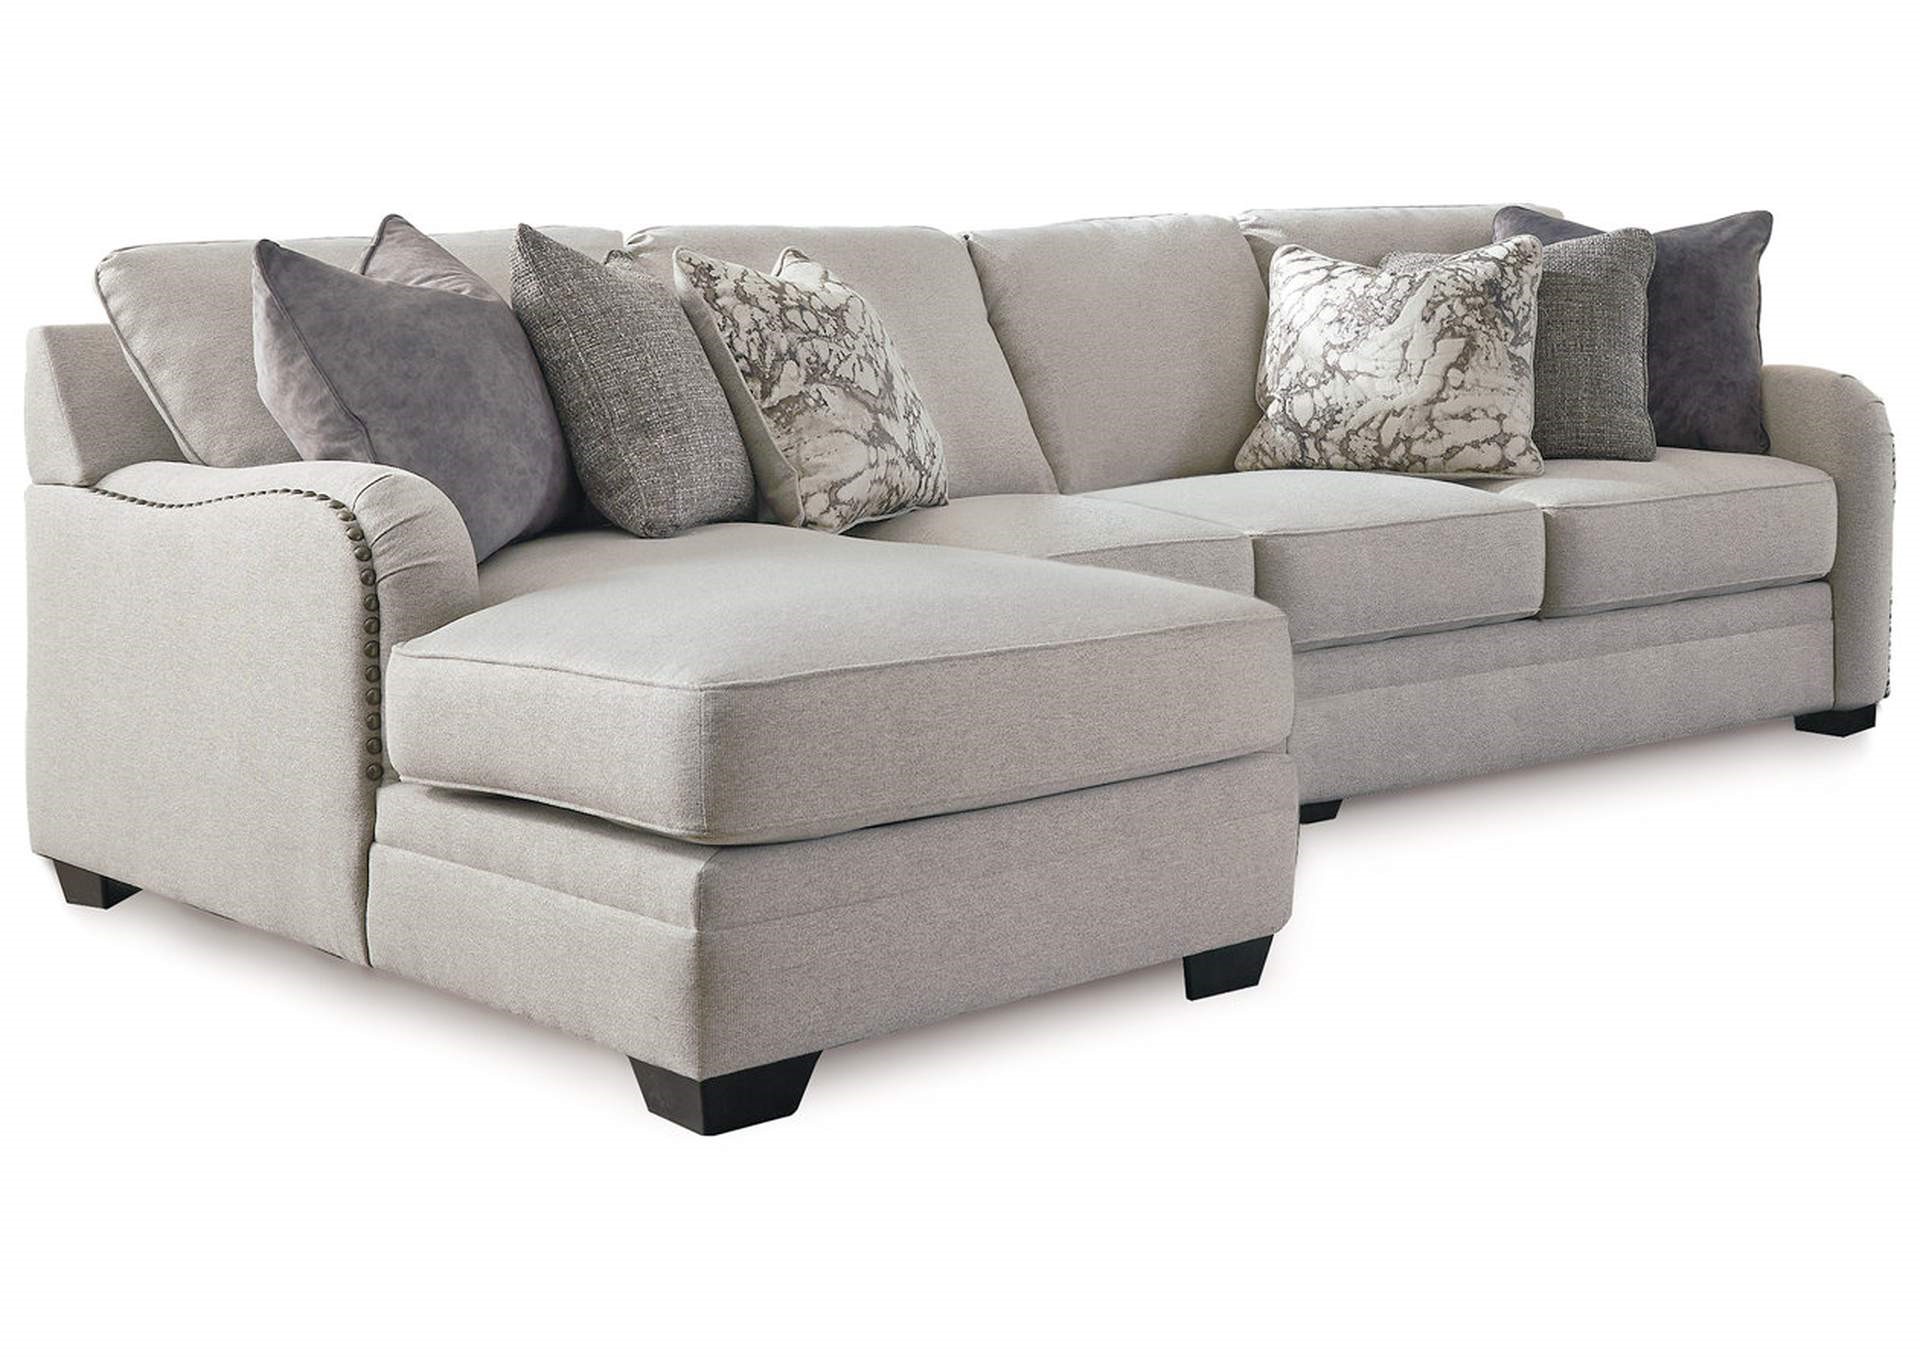 Maximizing Seating and Space with a 3-Piece Sectional with Chaise